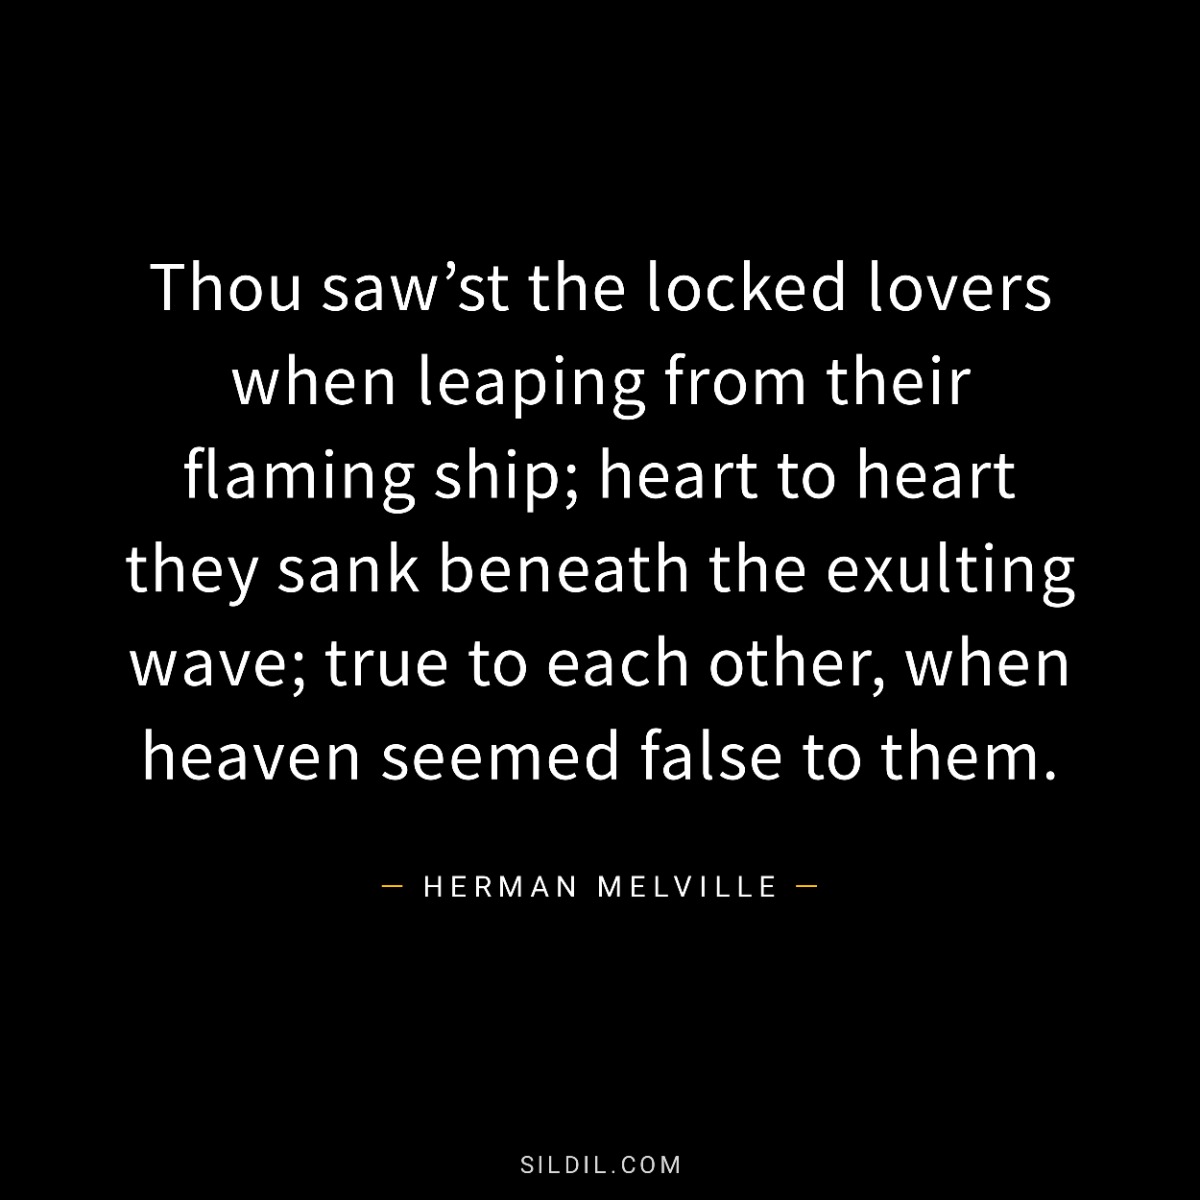 Thou saw’st the locked lovers when leaping from their flaming ship; heart to heart they sank beneath the exulting wave; true to each other, when heaven seemed false to them.